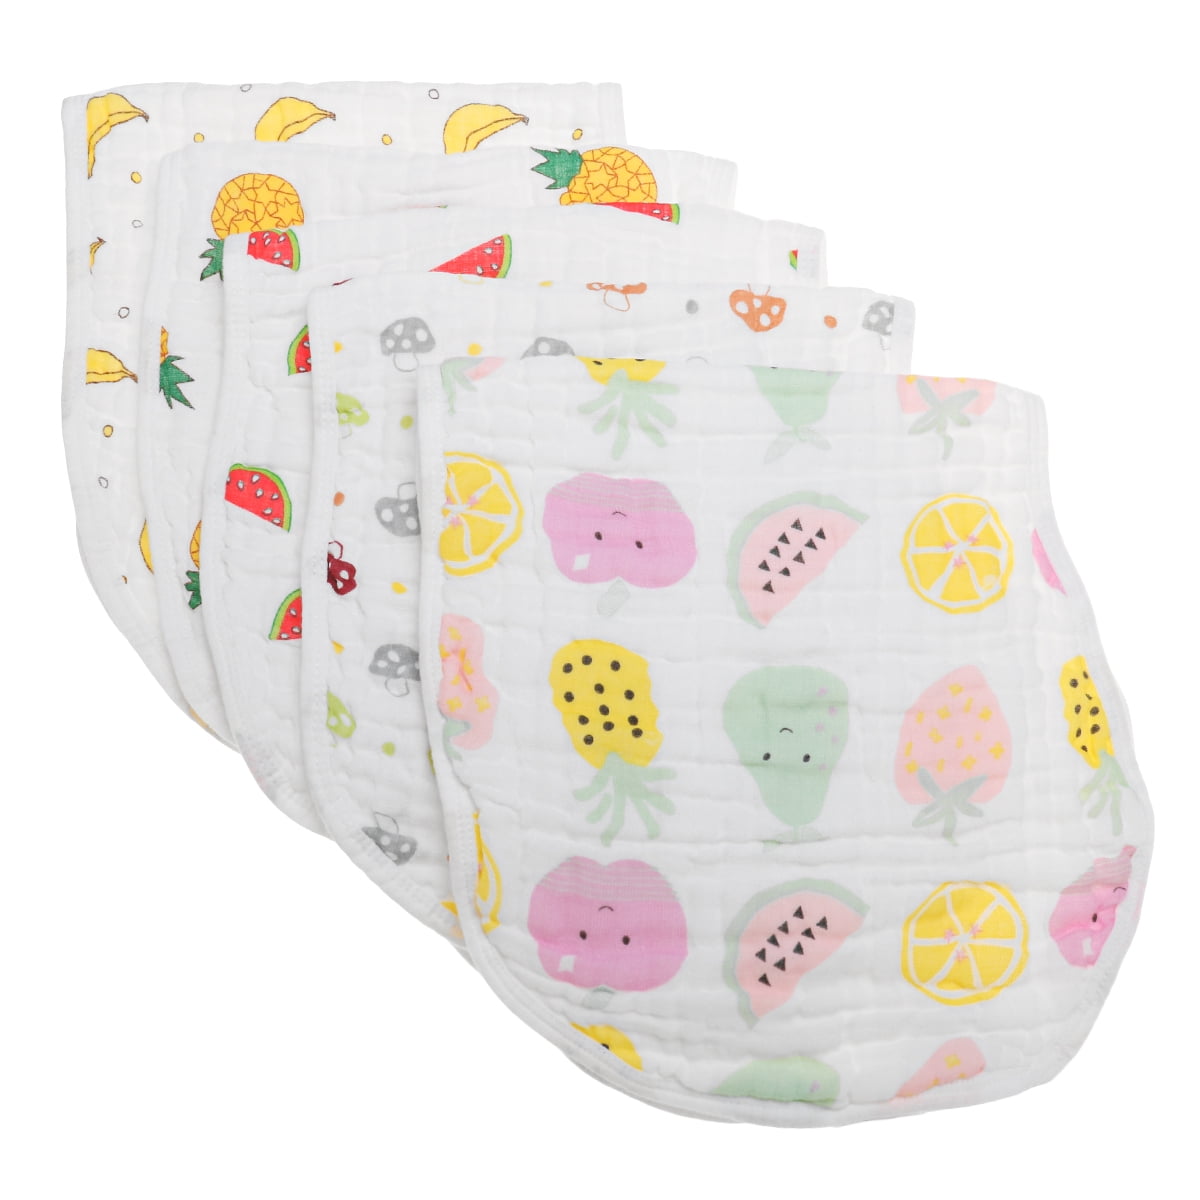 100% Organic Cotton Soft Absorbent Triple Layer Burping Rags for Newborns Baby Shower Gift 5-Pack Baby Burp Cloths for Girls 